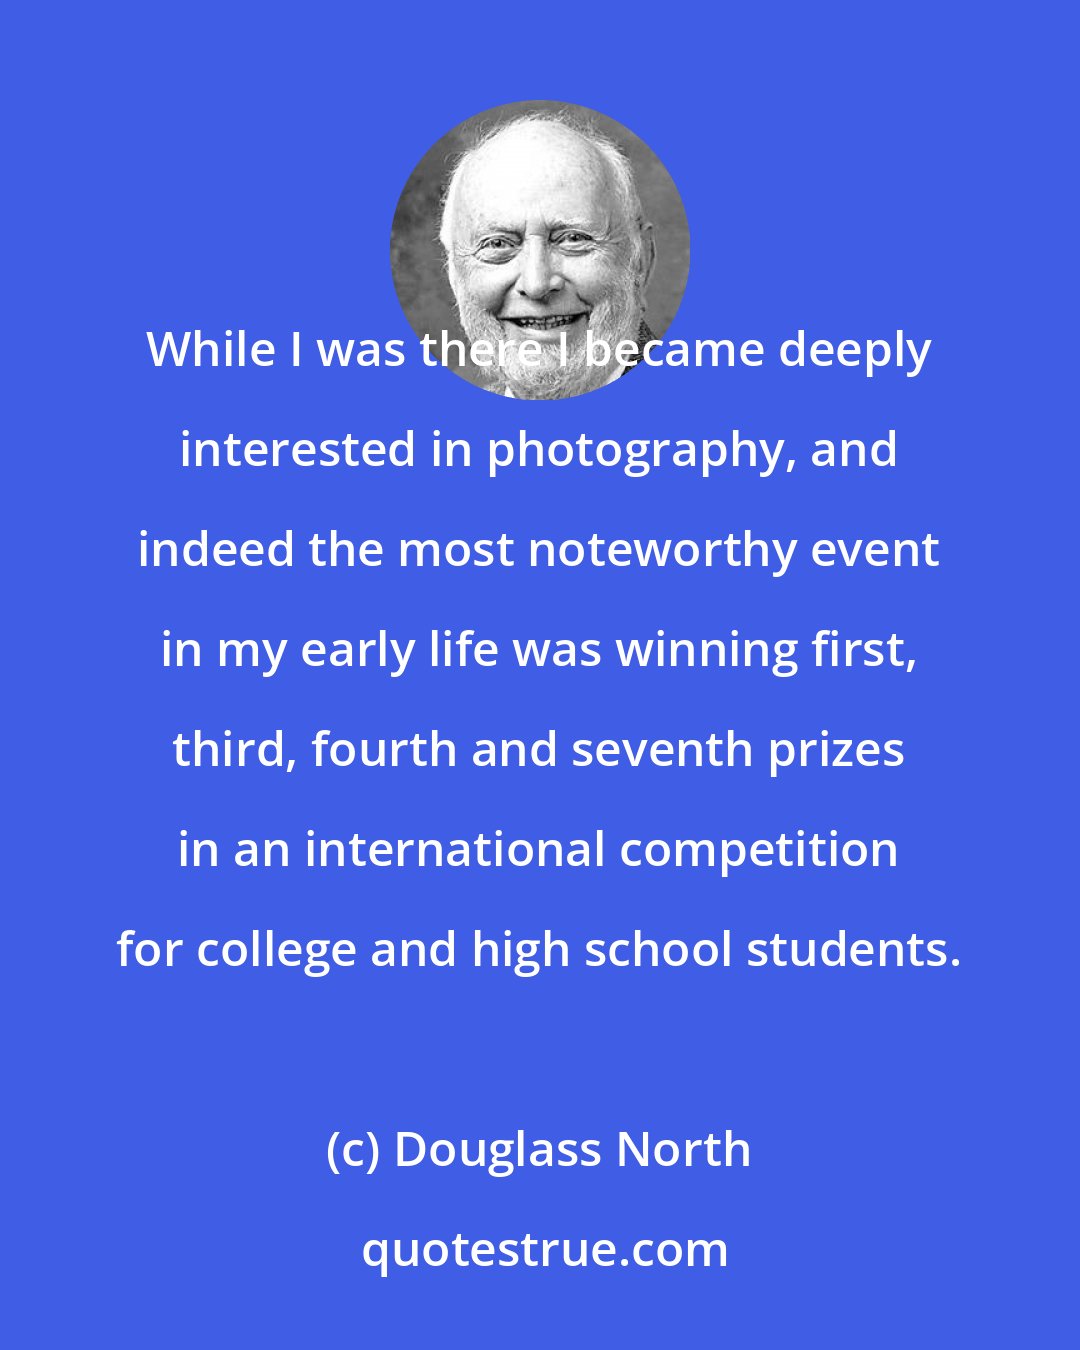 Douglass North: While I was there I became deeply interested in photography, and indeed the most noteworthy event in my early life was winning first, third, fourth and seventh prizes in an international competition for college and high school students.